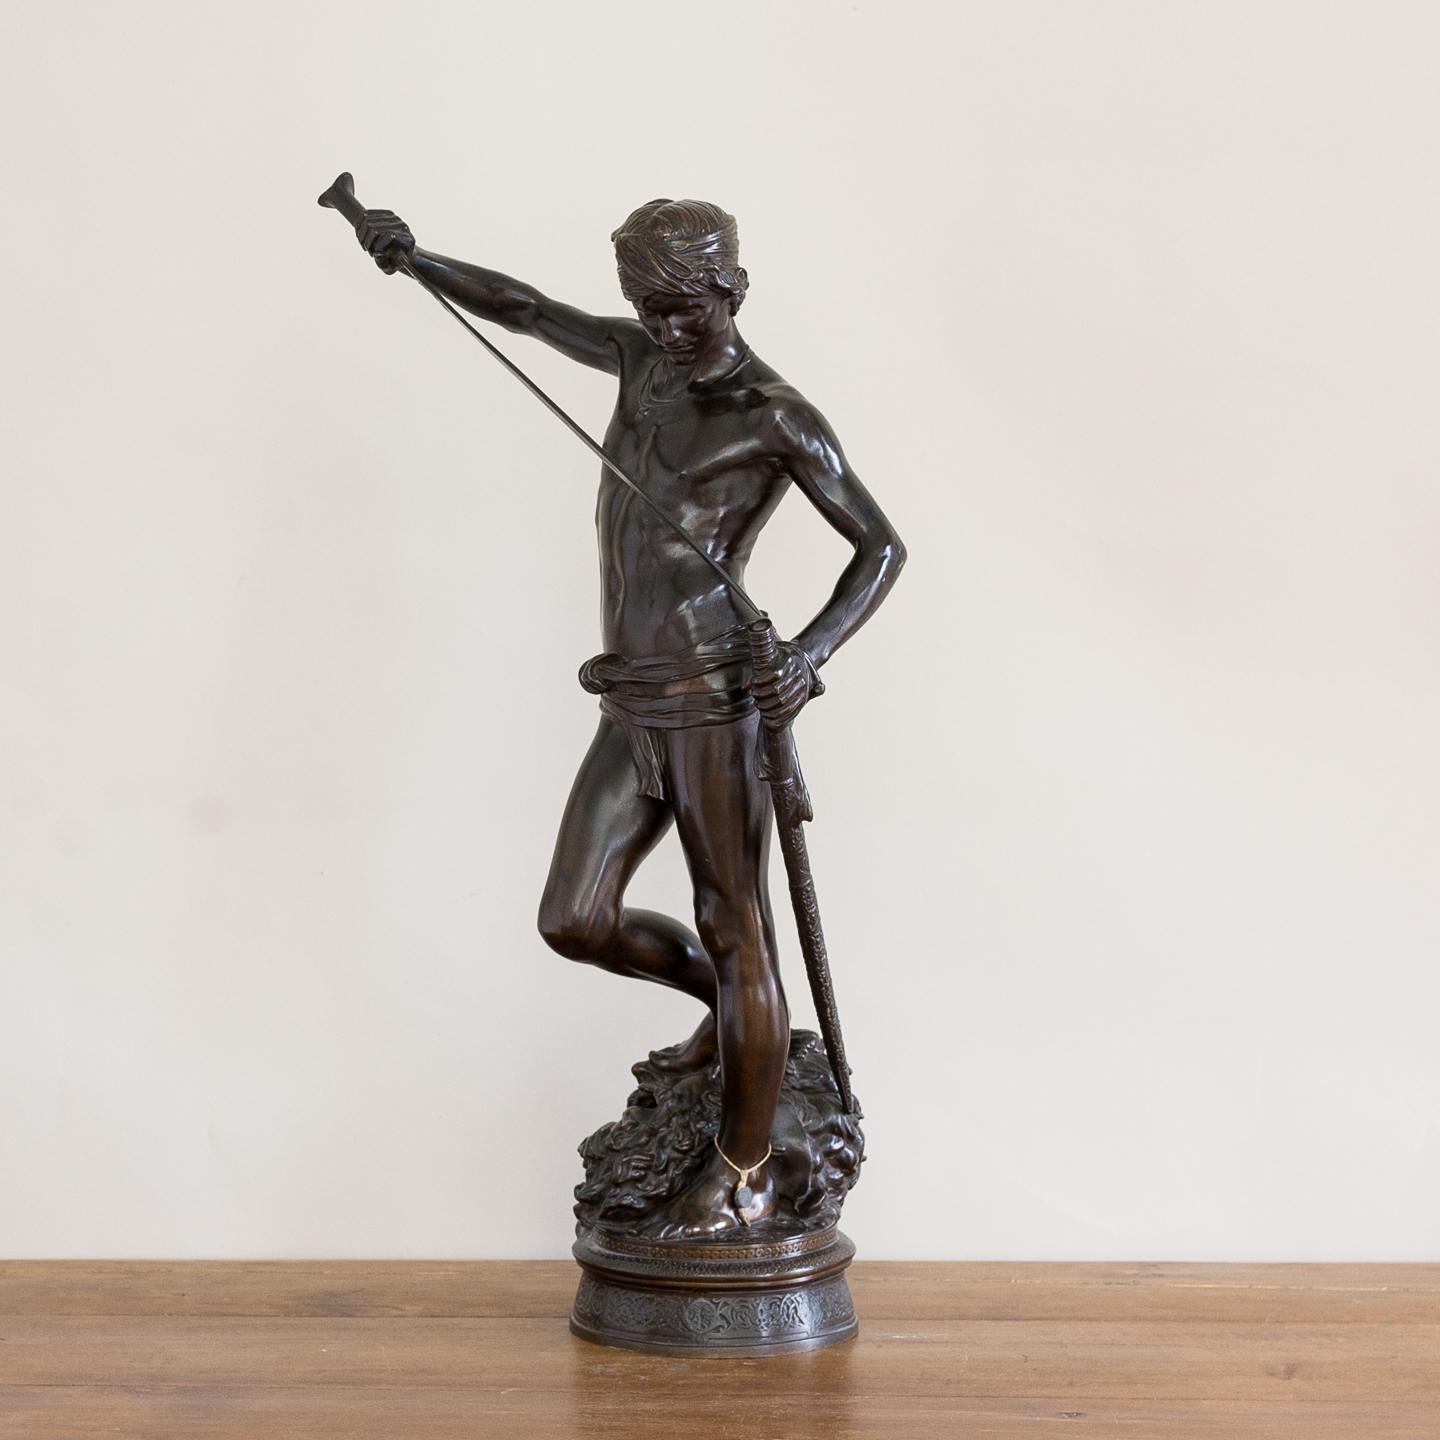 19th century French bronze of David slaying Goliath, cast by Barbedienne after the original by Antonin Mercie, the base signed 'A. Mercie' and 'F. Barbedienne, Fondeur', circa 1875.